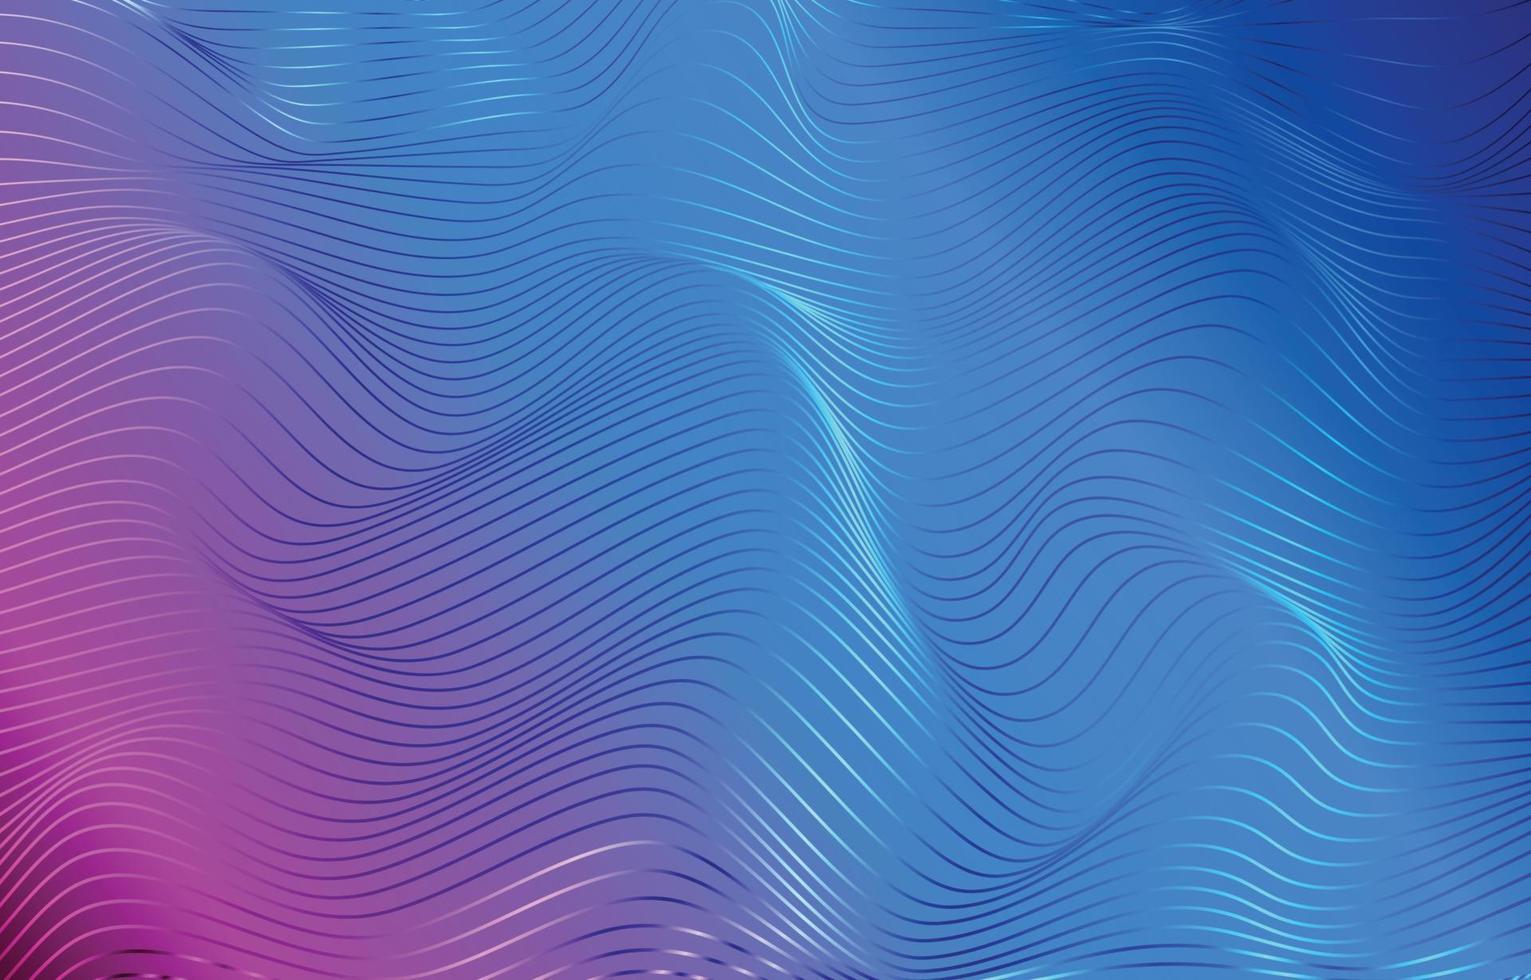 Modern Abstract Wave and Line Concept vector